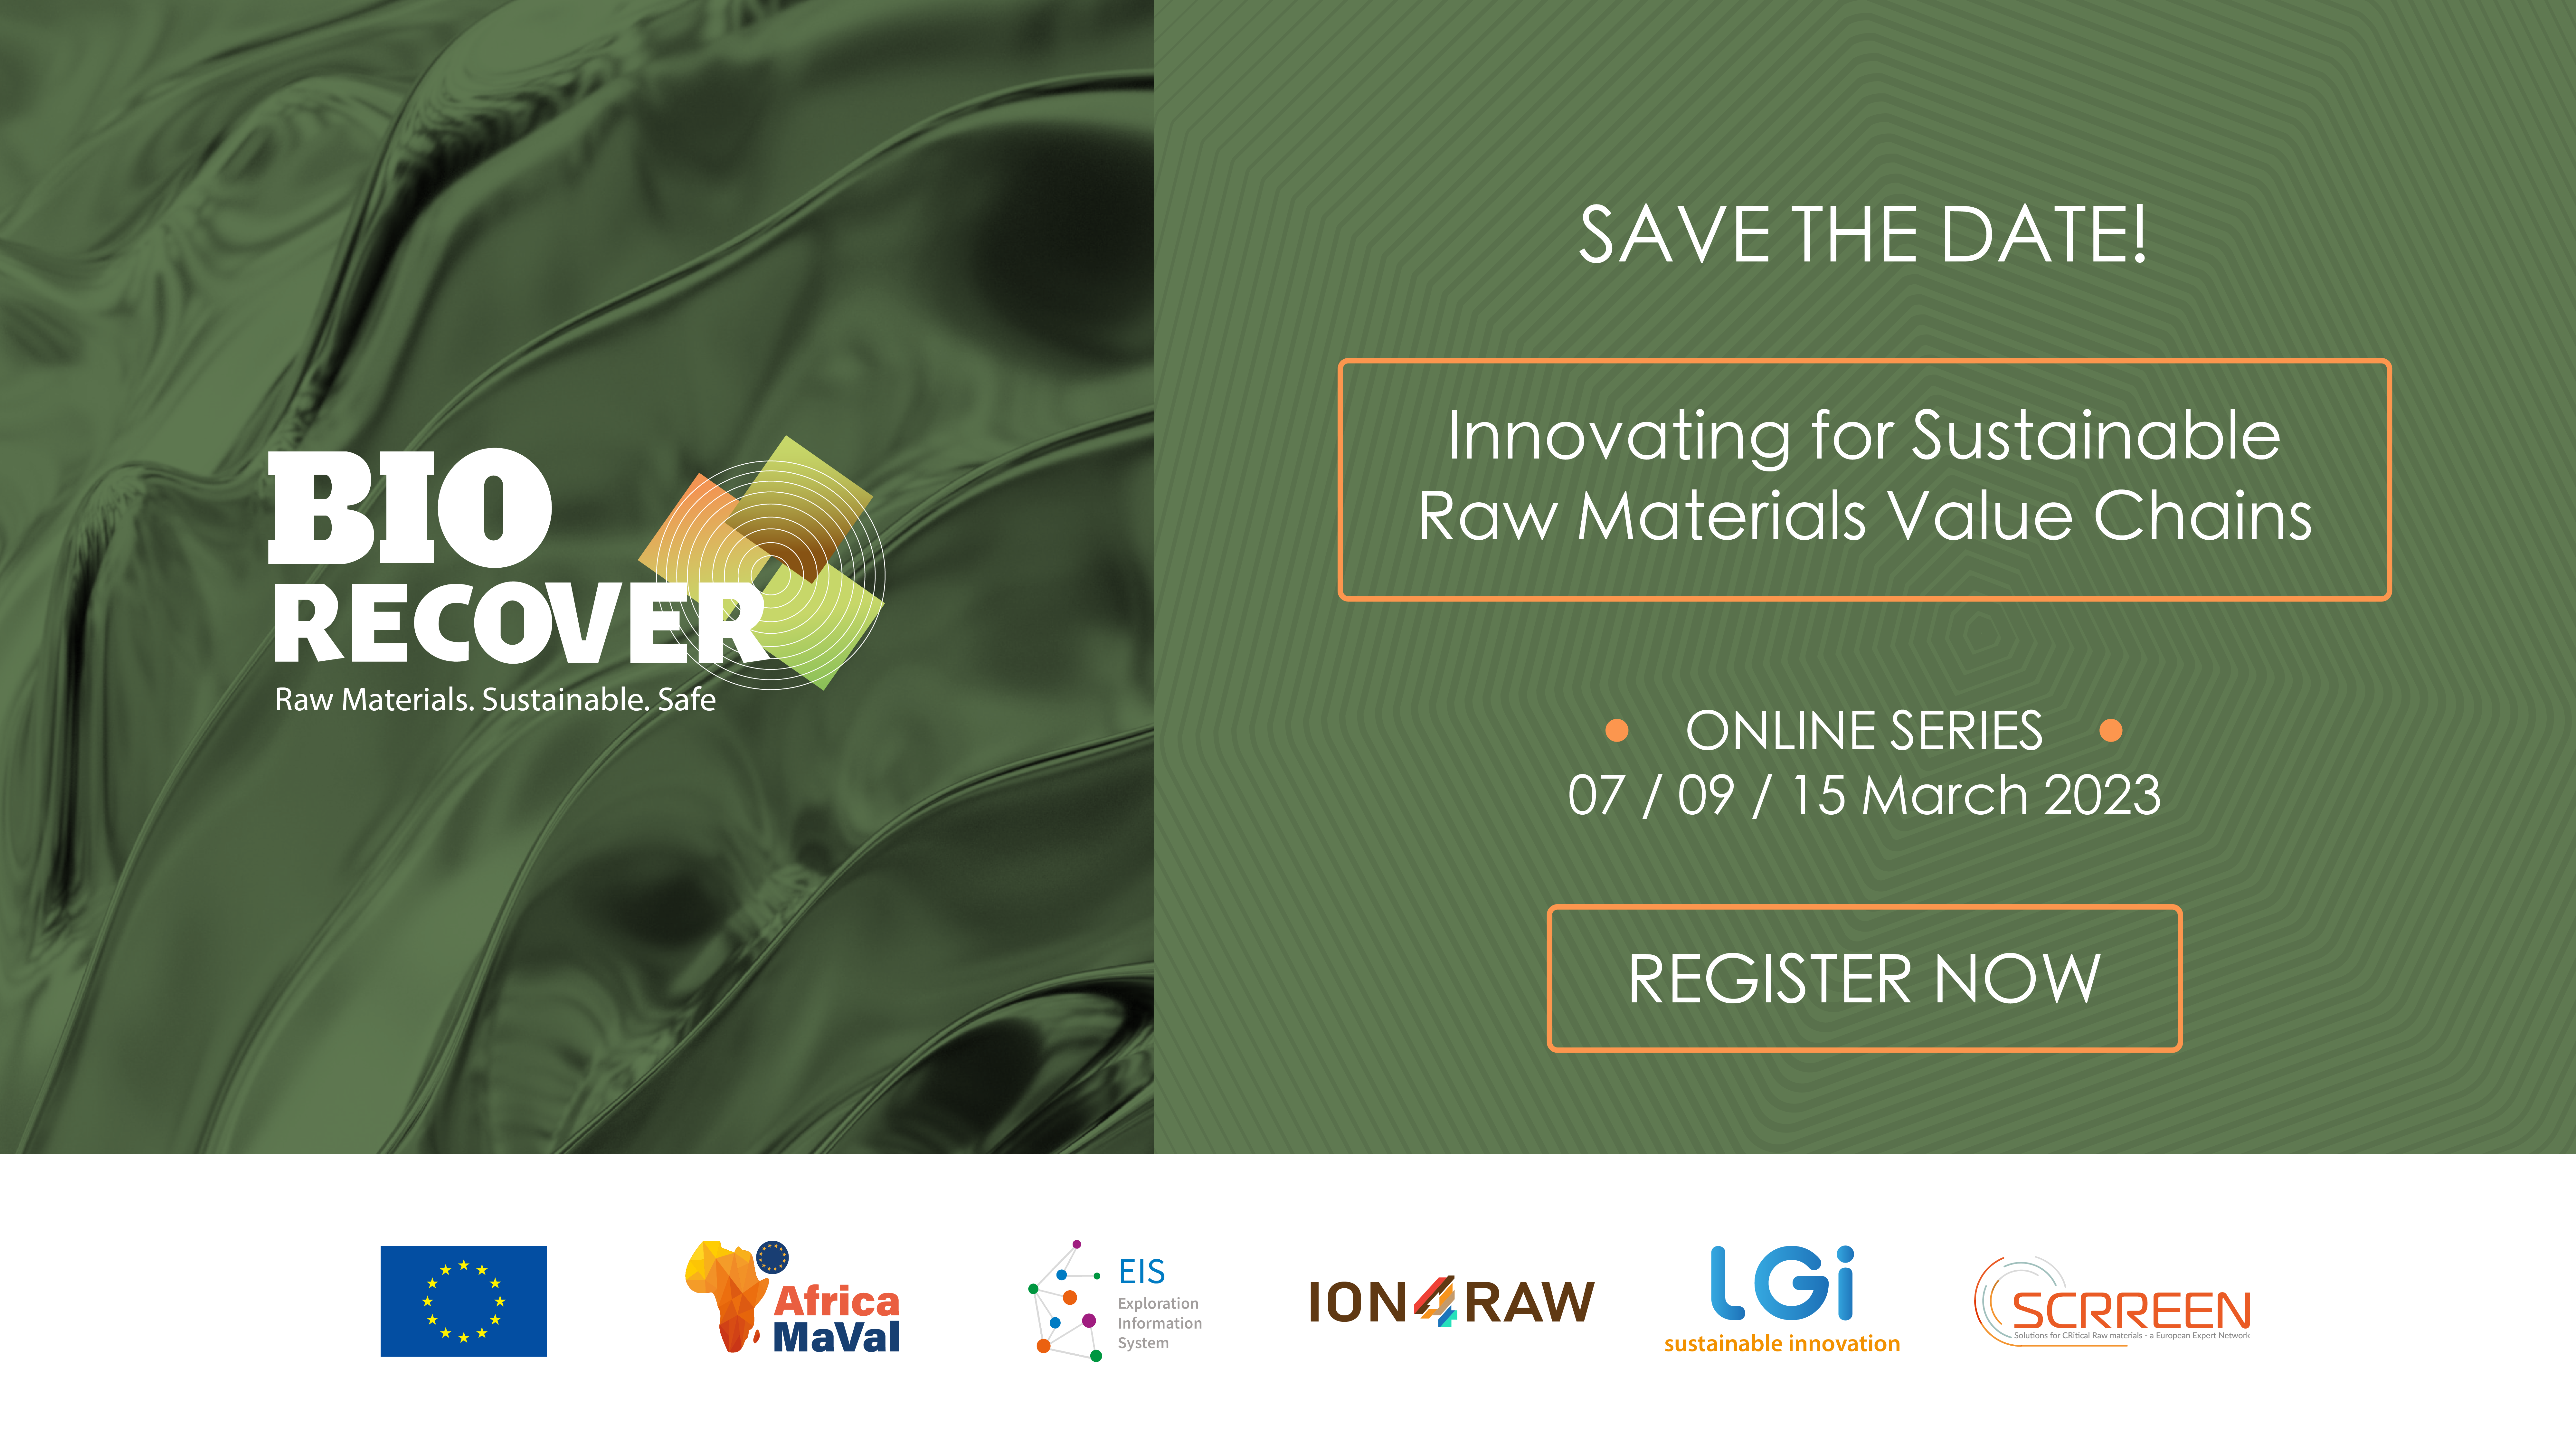 Seminar series: Innovating for Sustainable Raw Materials Value Chains